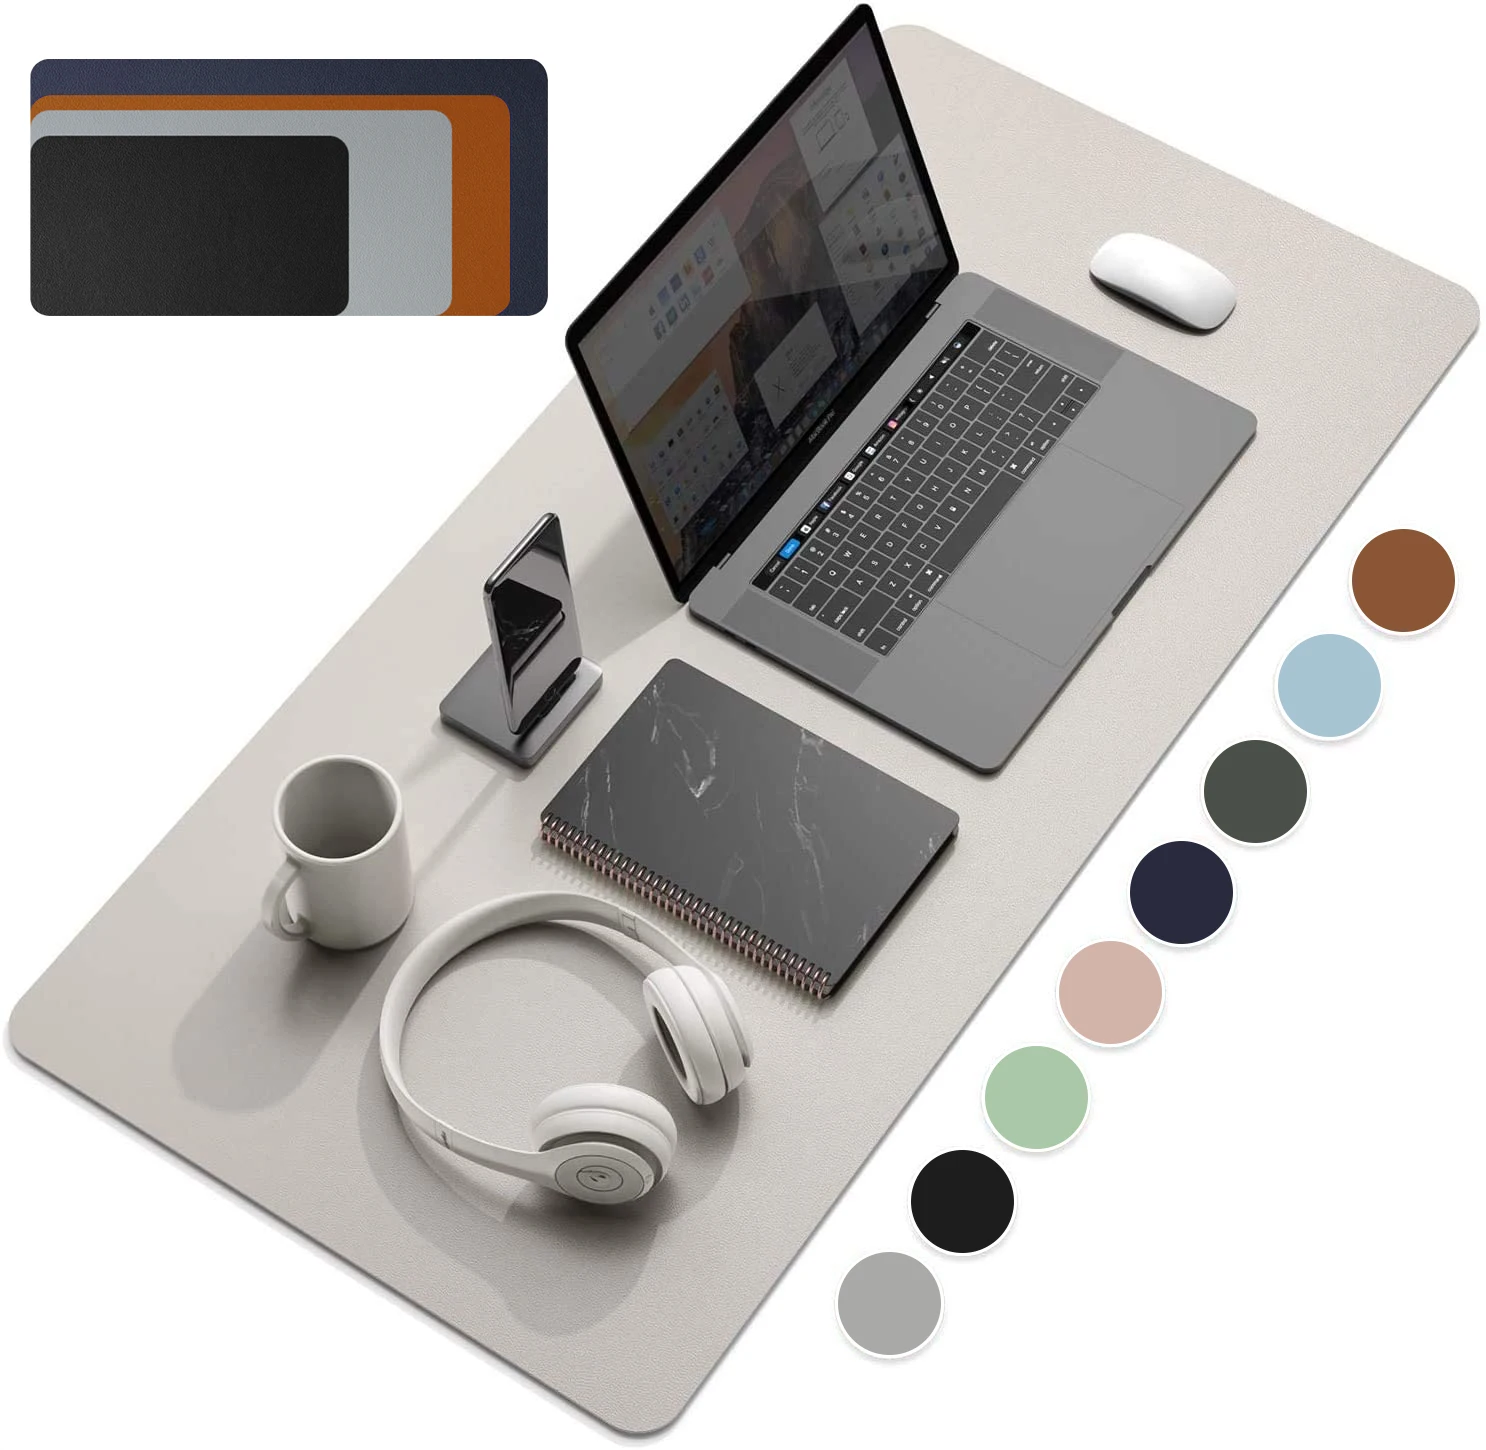 Large Size Office Desk Protector Mat PU Leather Waterproof Mouse Pad Desktop Keyboard Desk Pad Gaming Mousepad PC Accessories white mouse pad fish deskmat gaming laptops large mousepad big keyboard mat gamer computer office carpet desk pad xxl mouse pad